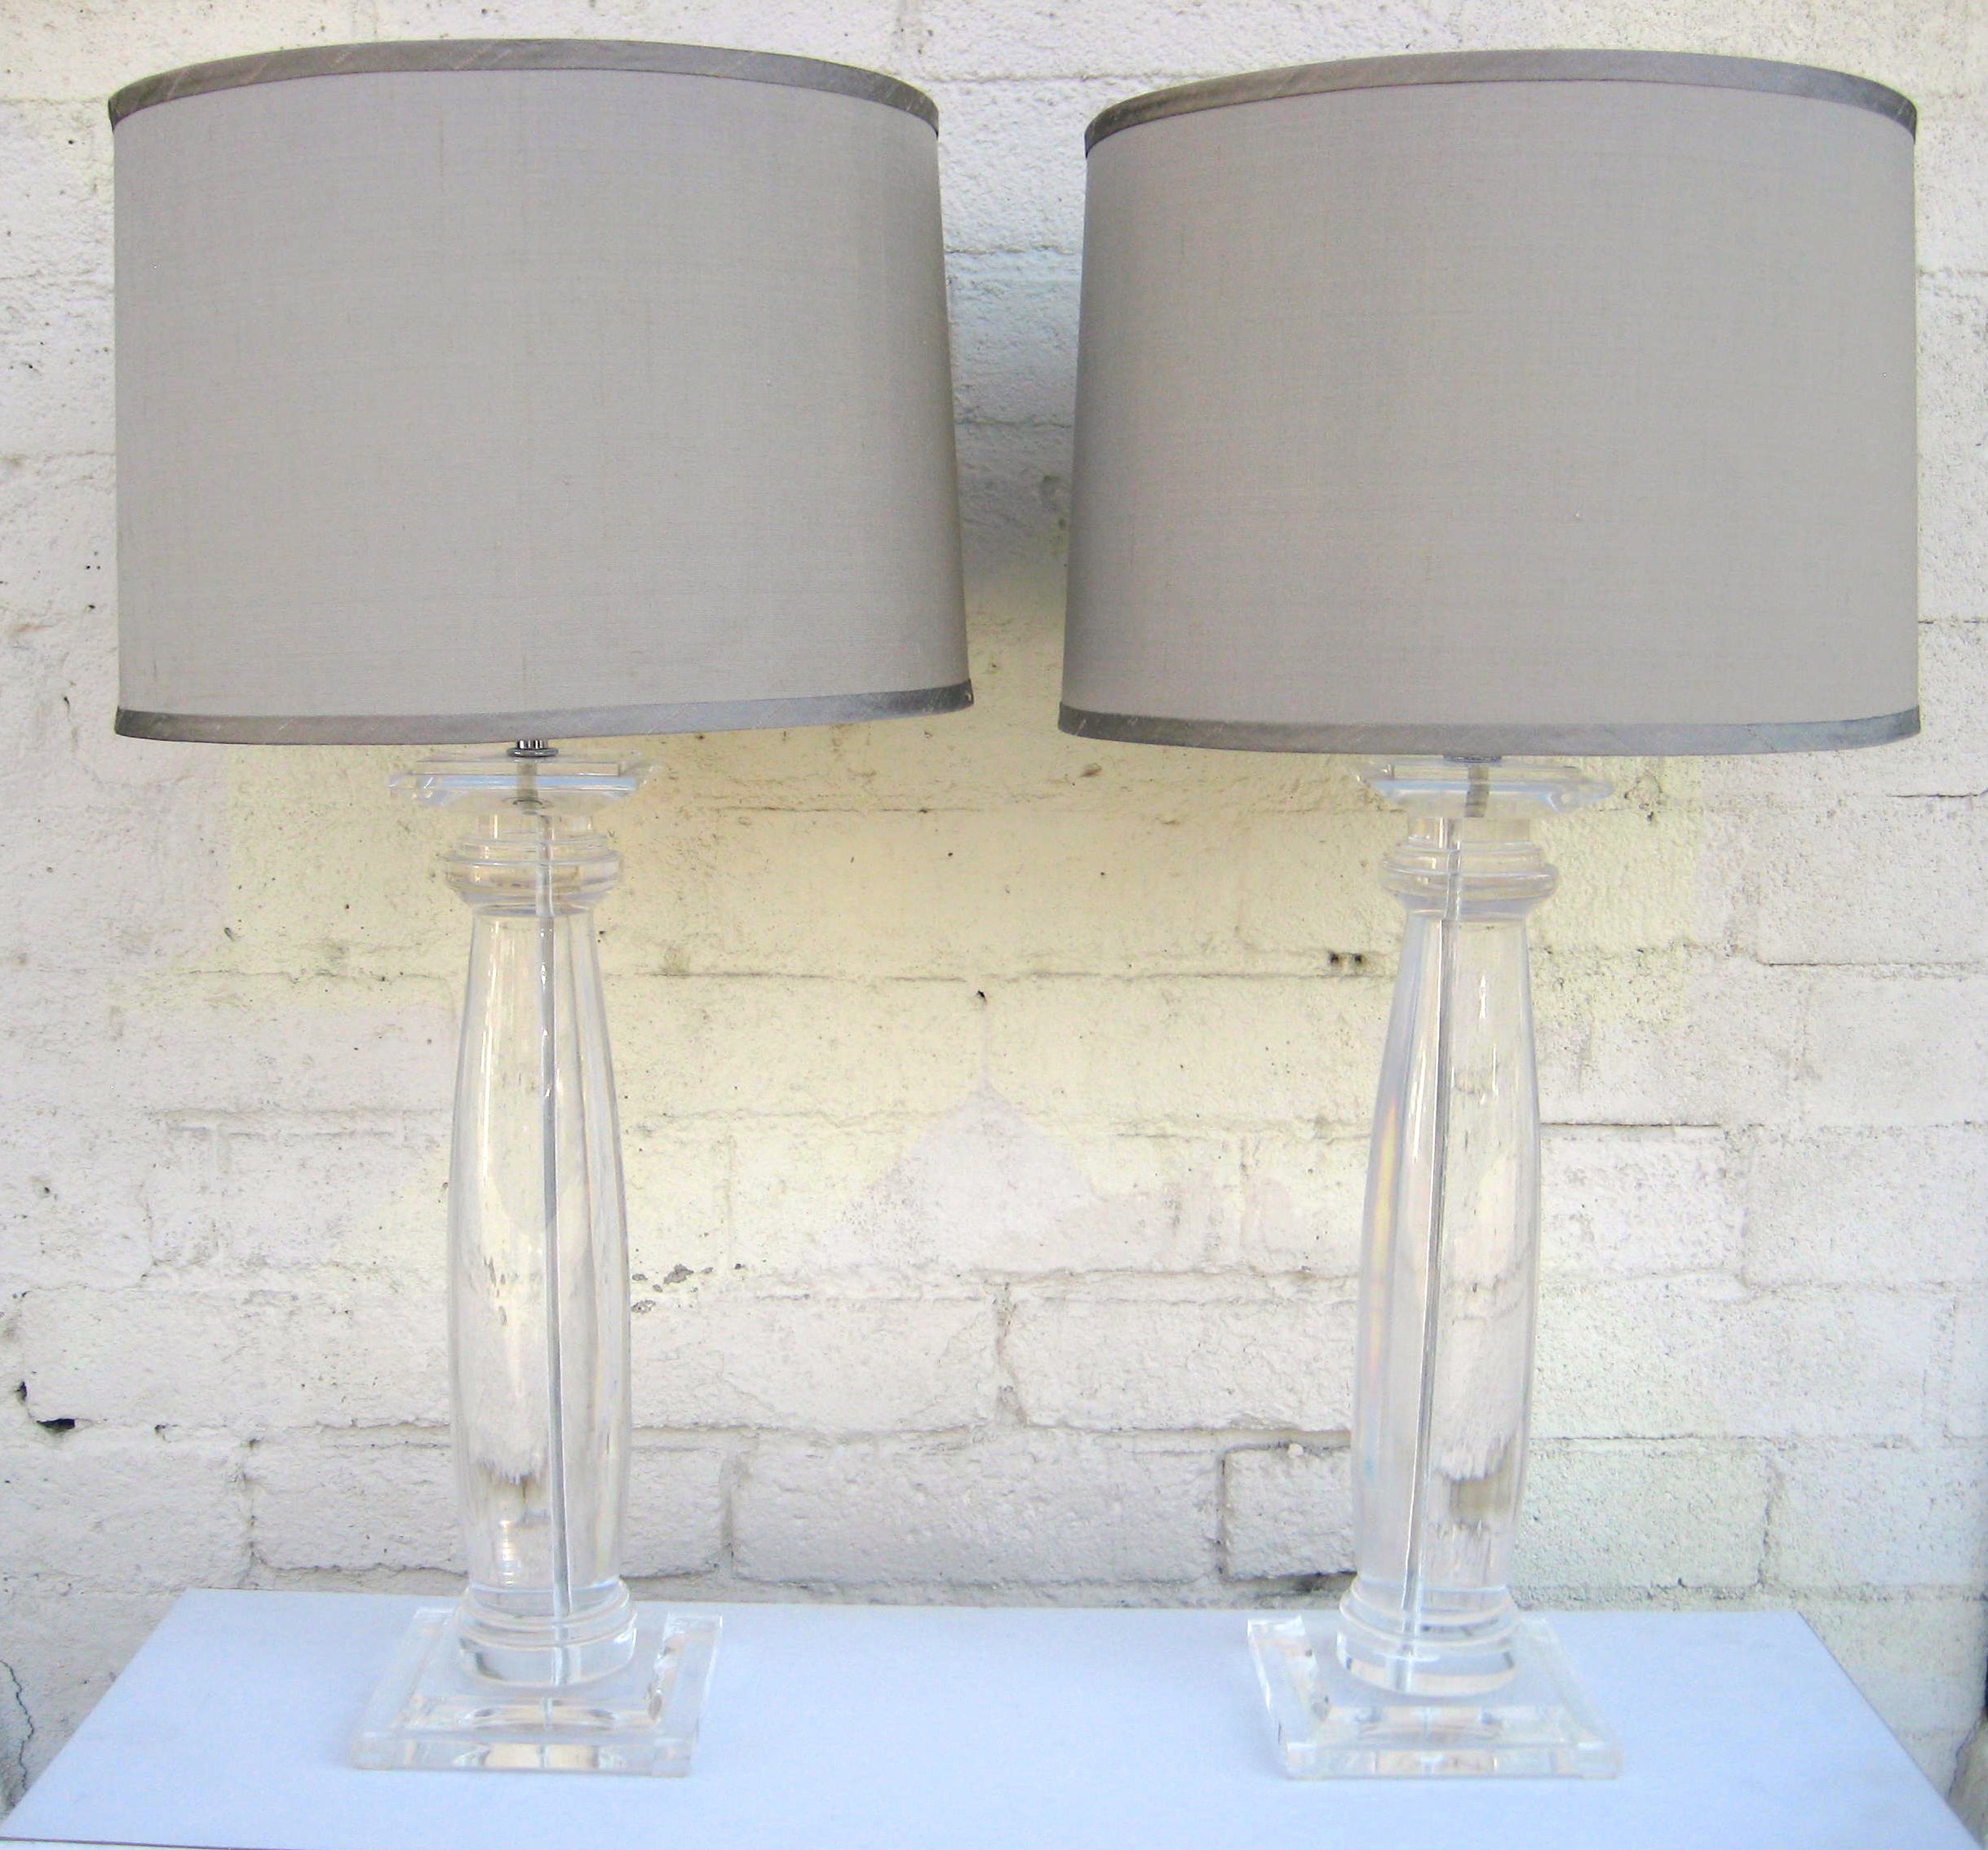 A pair of vintage Lucite column form lamps by Karl Springer C. 1970's